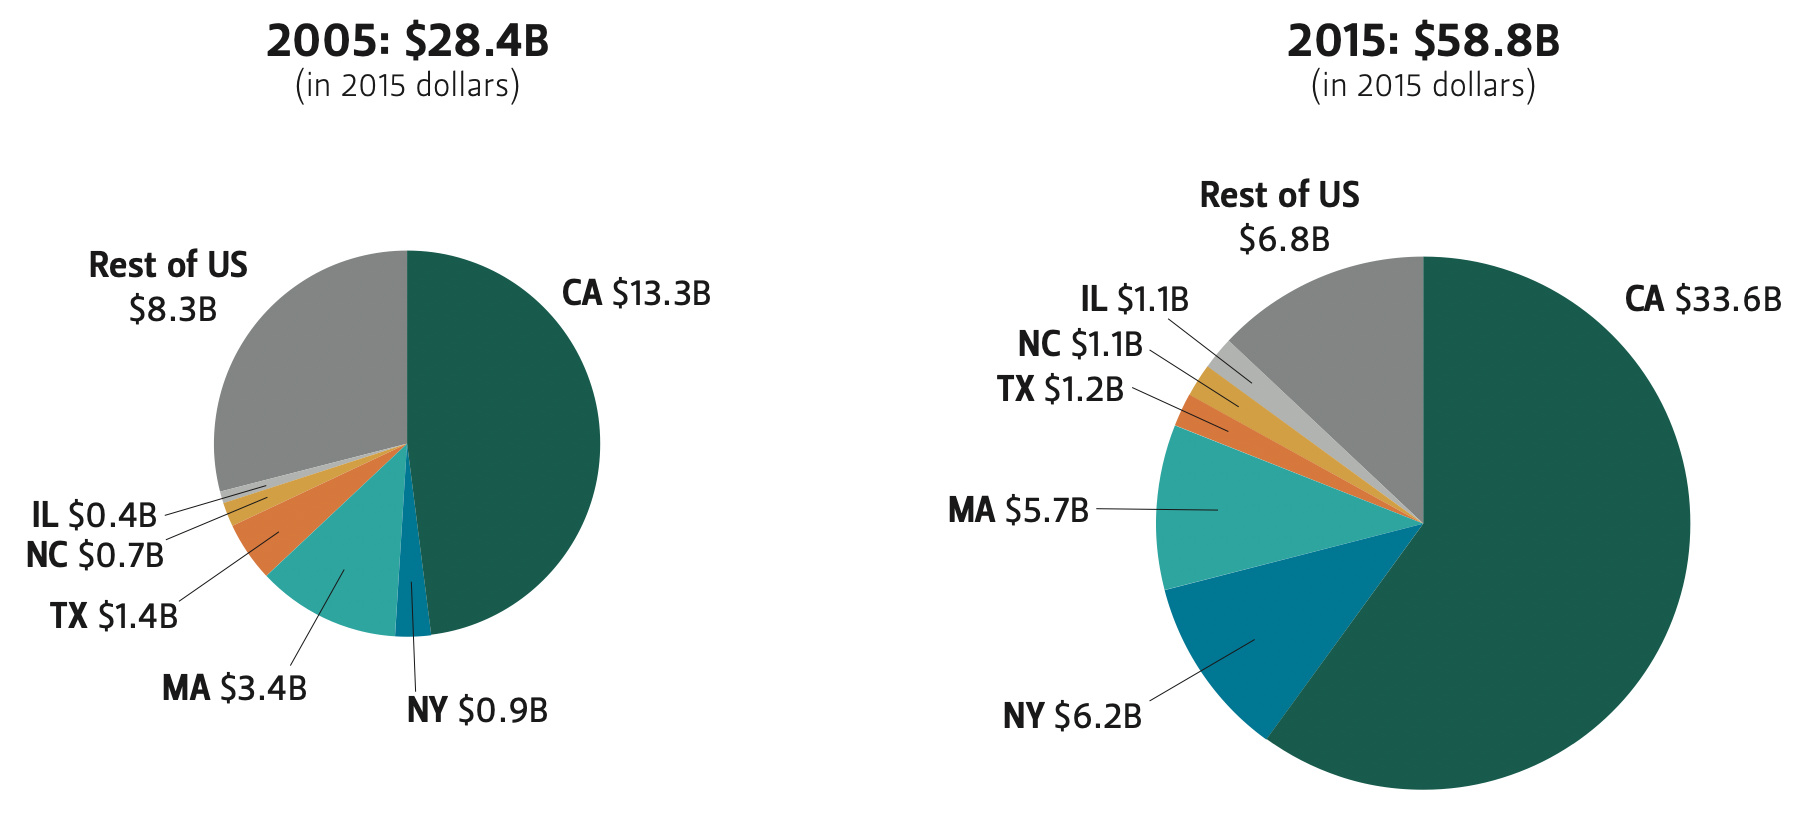 These pie charts show the growth of venture capital investments in the U.S. over time.